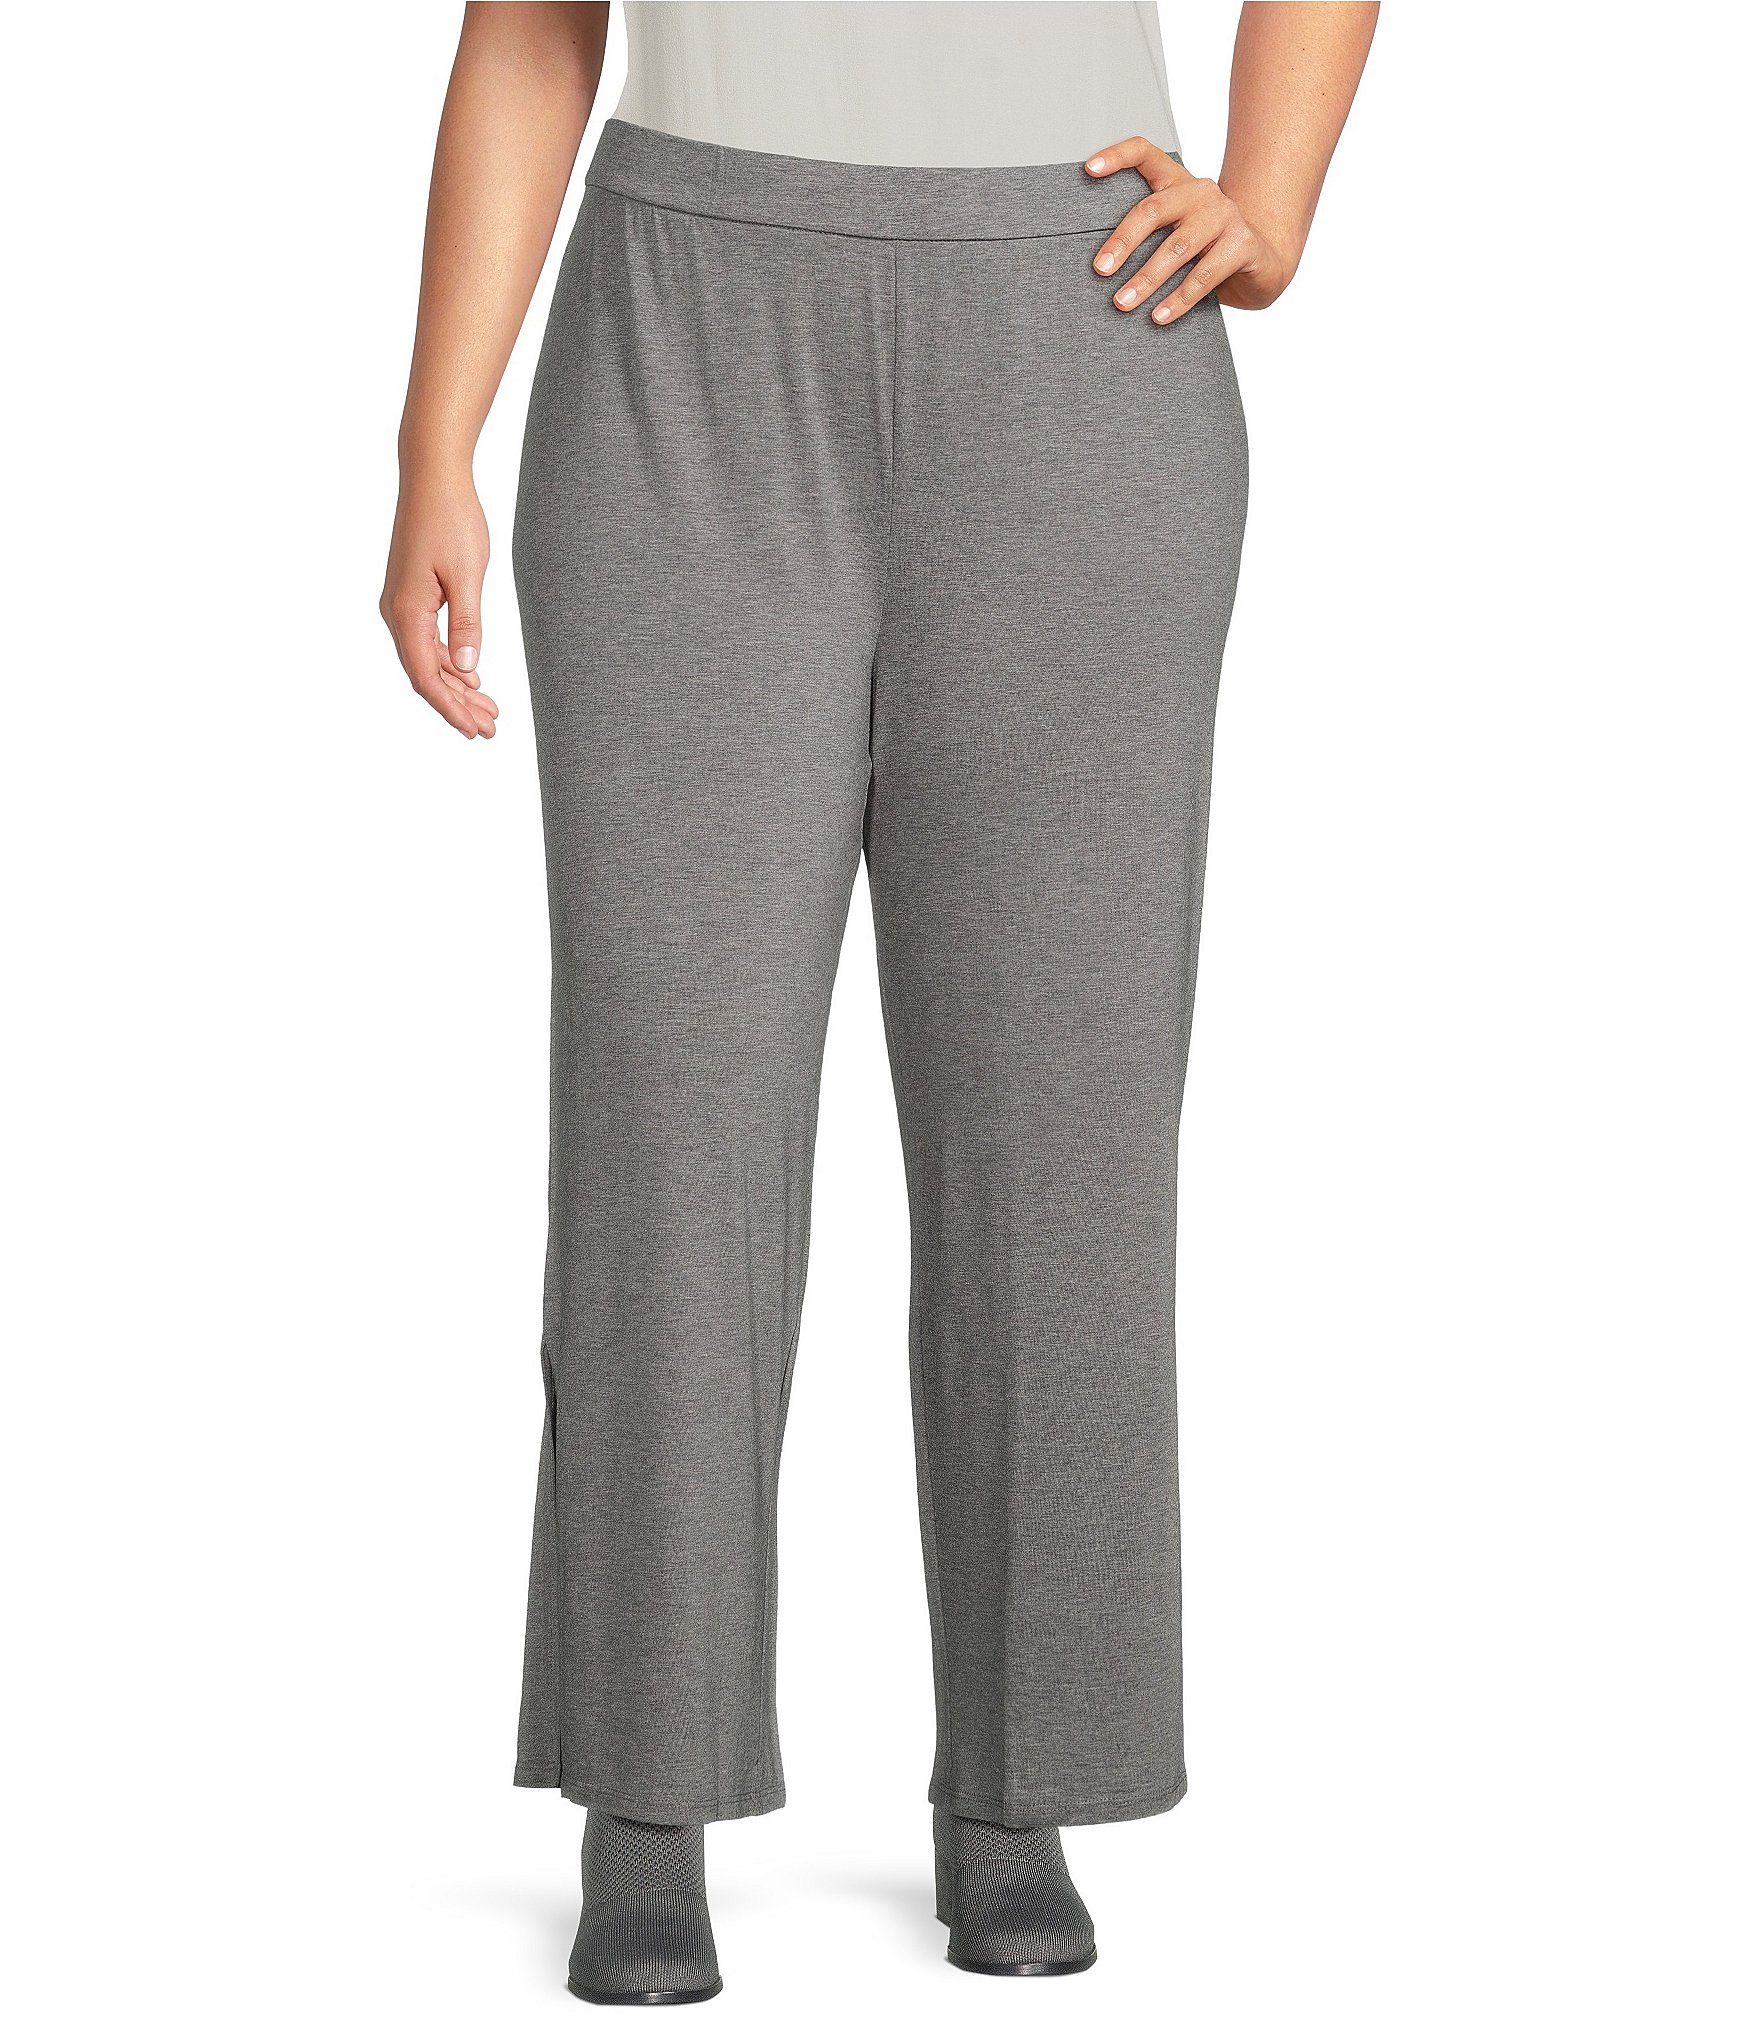 eileen fisher solid: Women's Plus Size Clothing